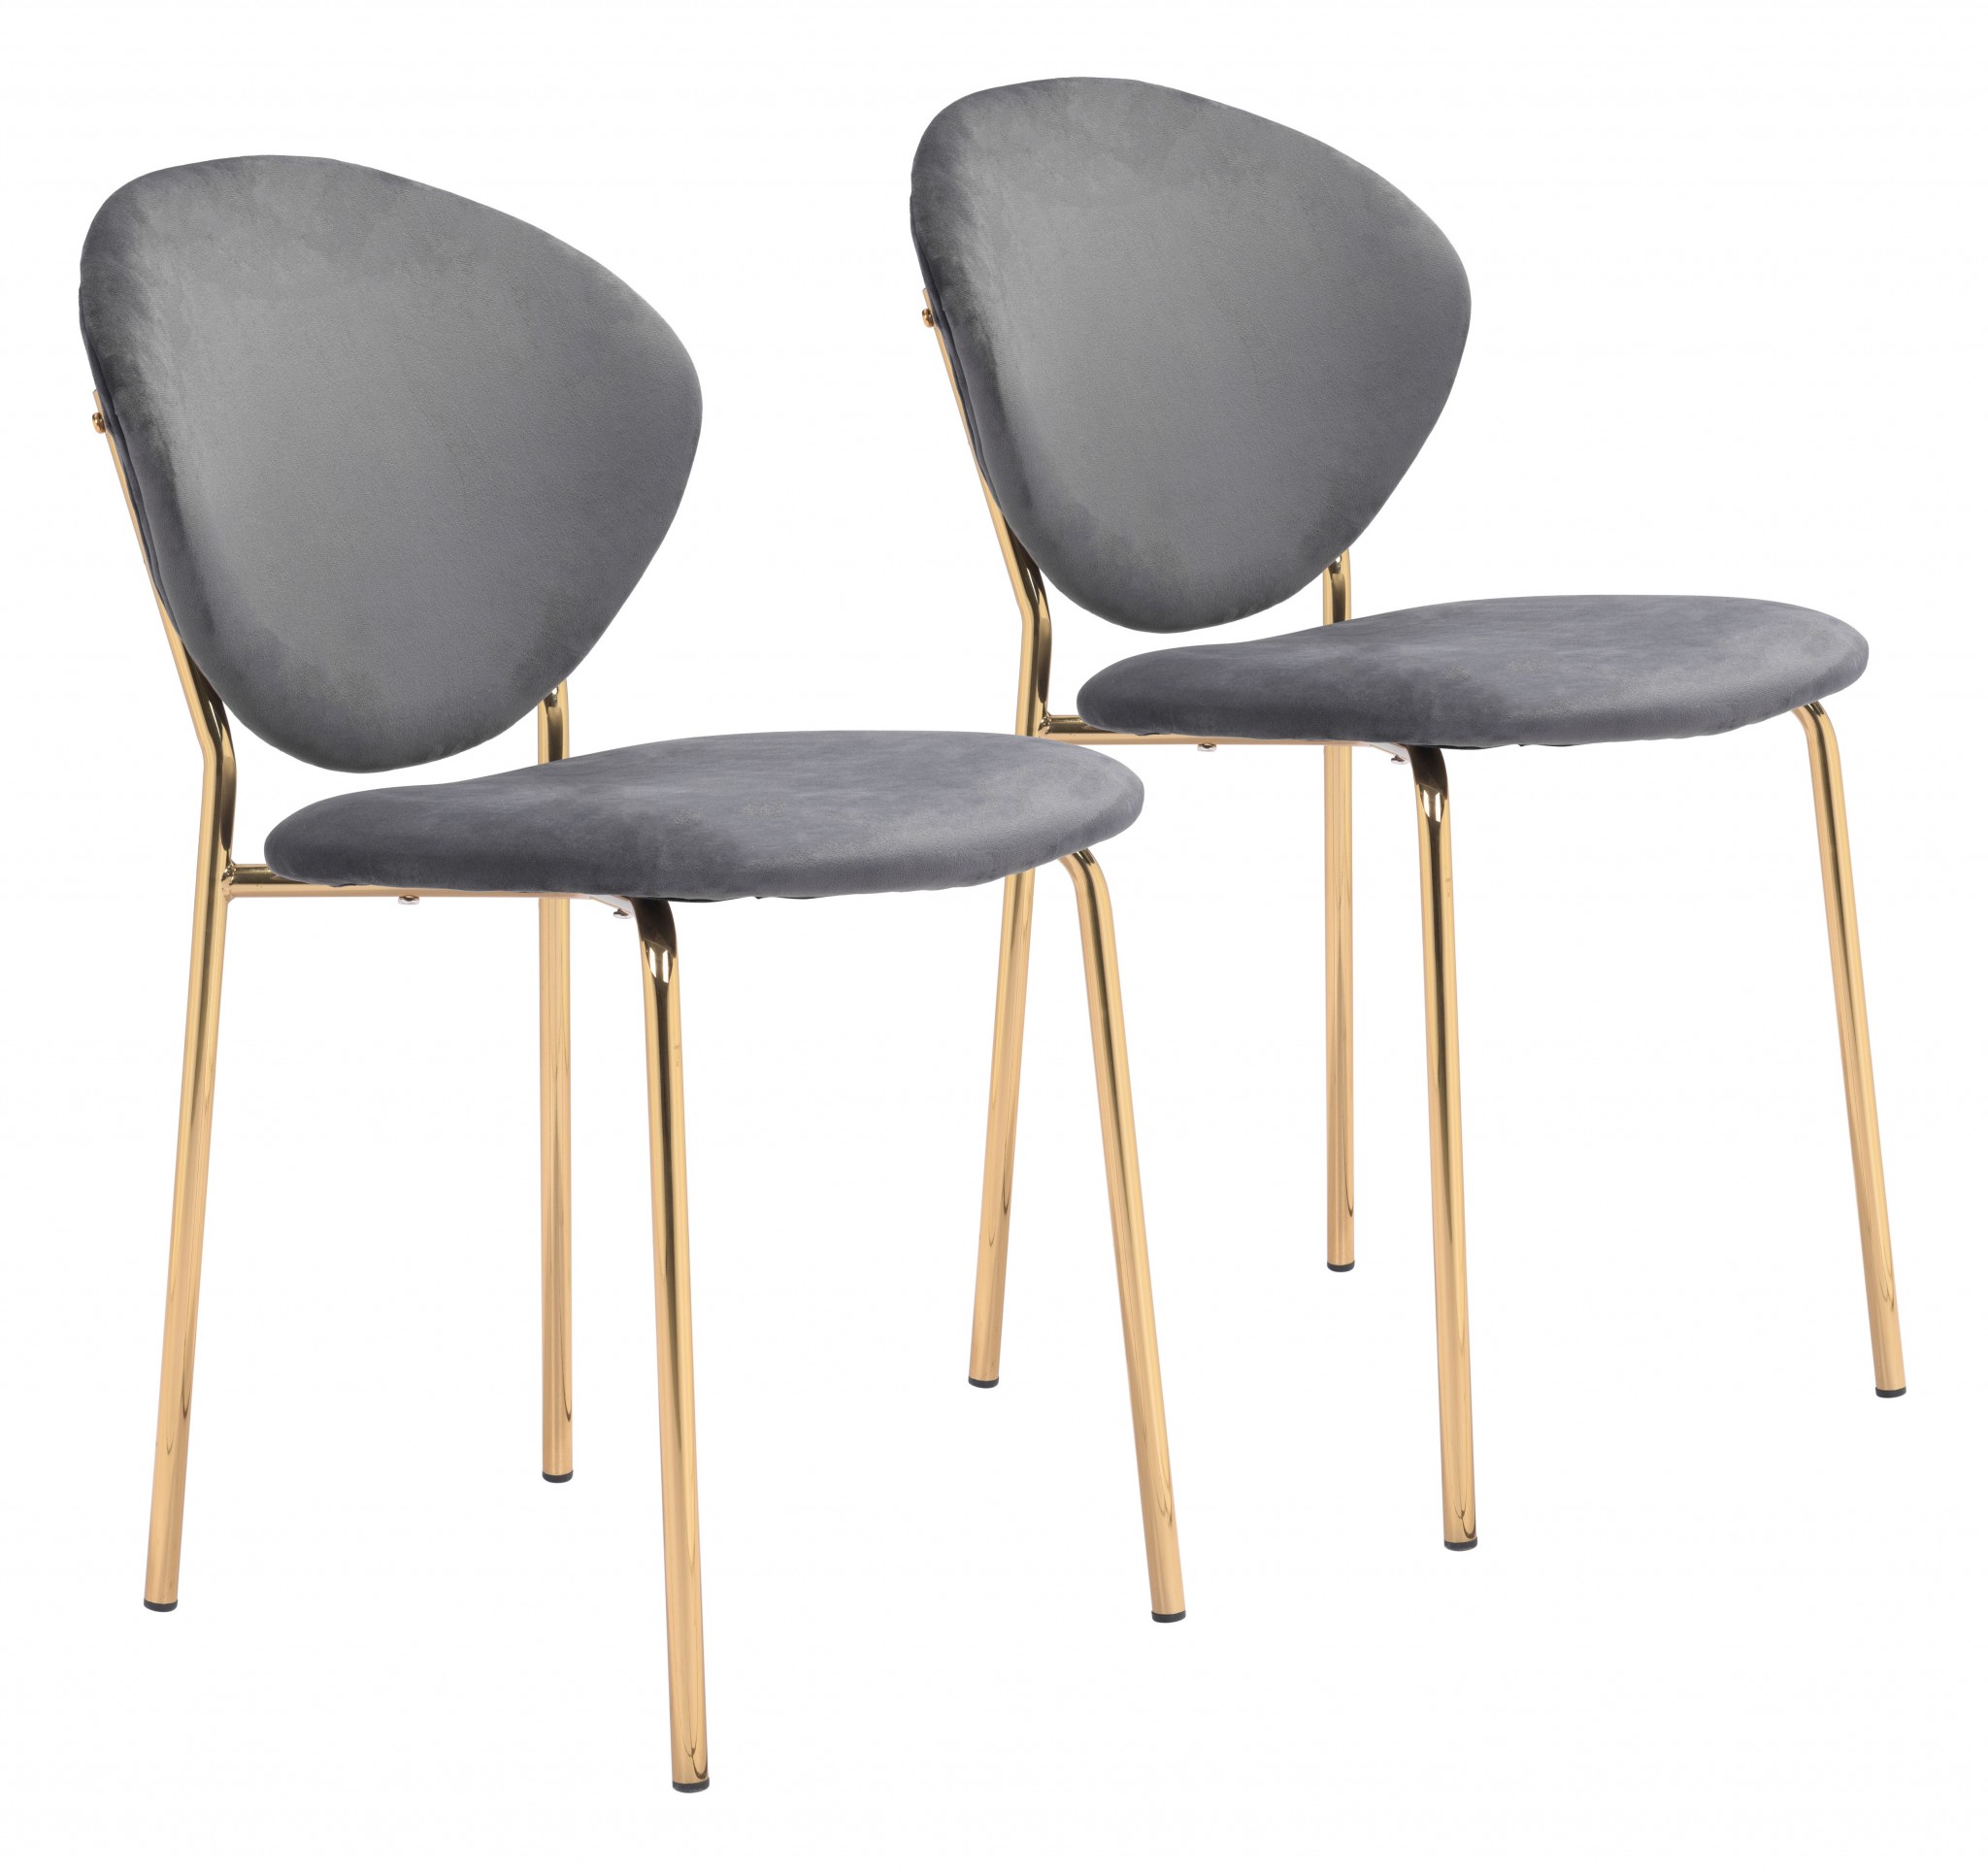 Set of Two Gray and Gold Modern Dining or Side Chairs